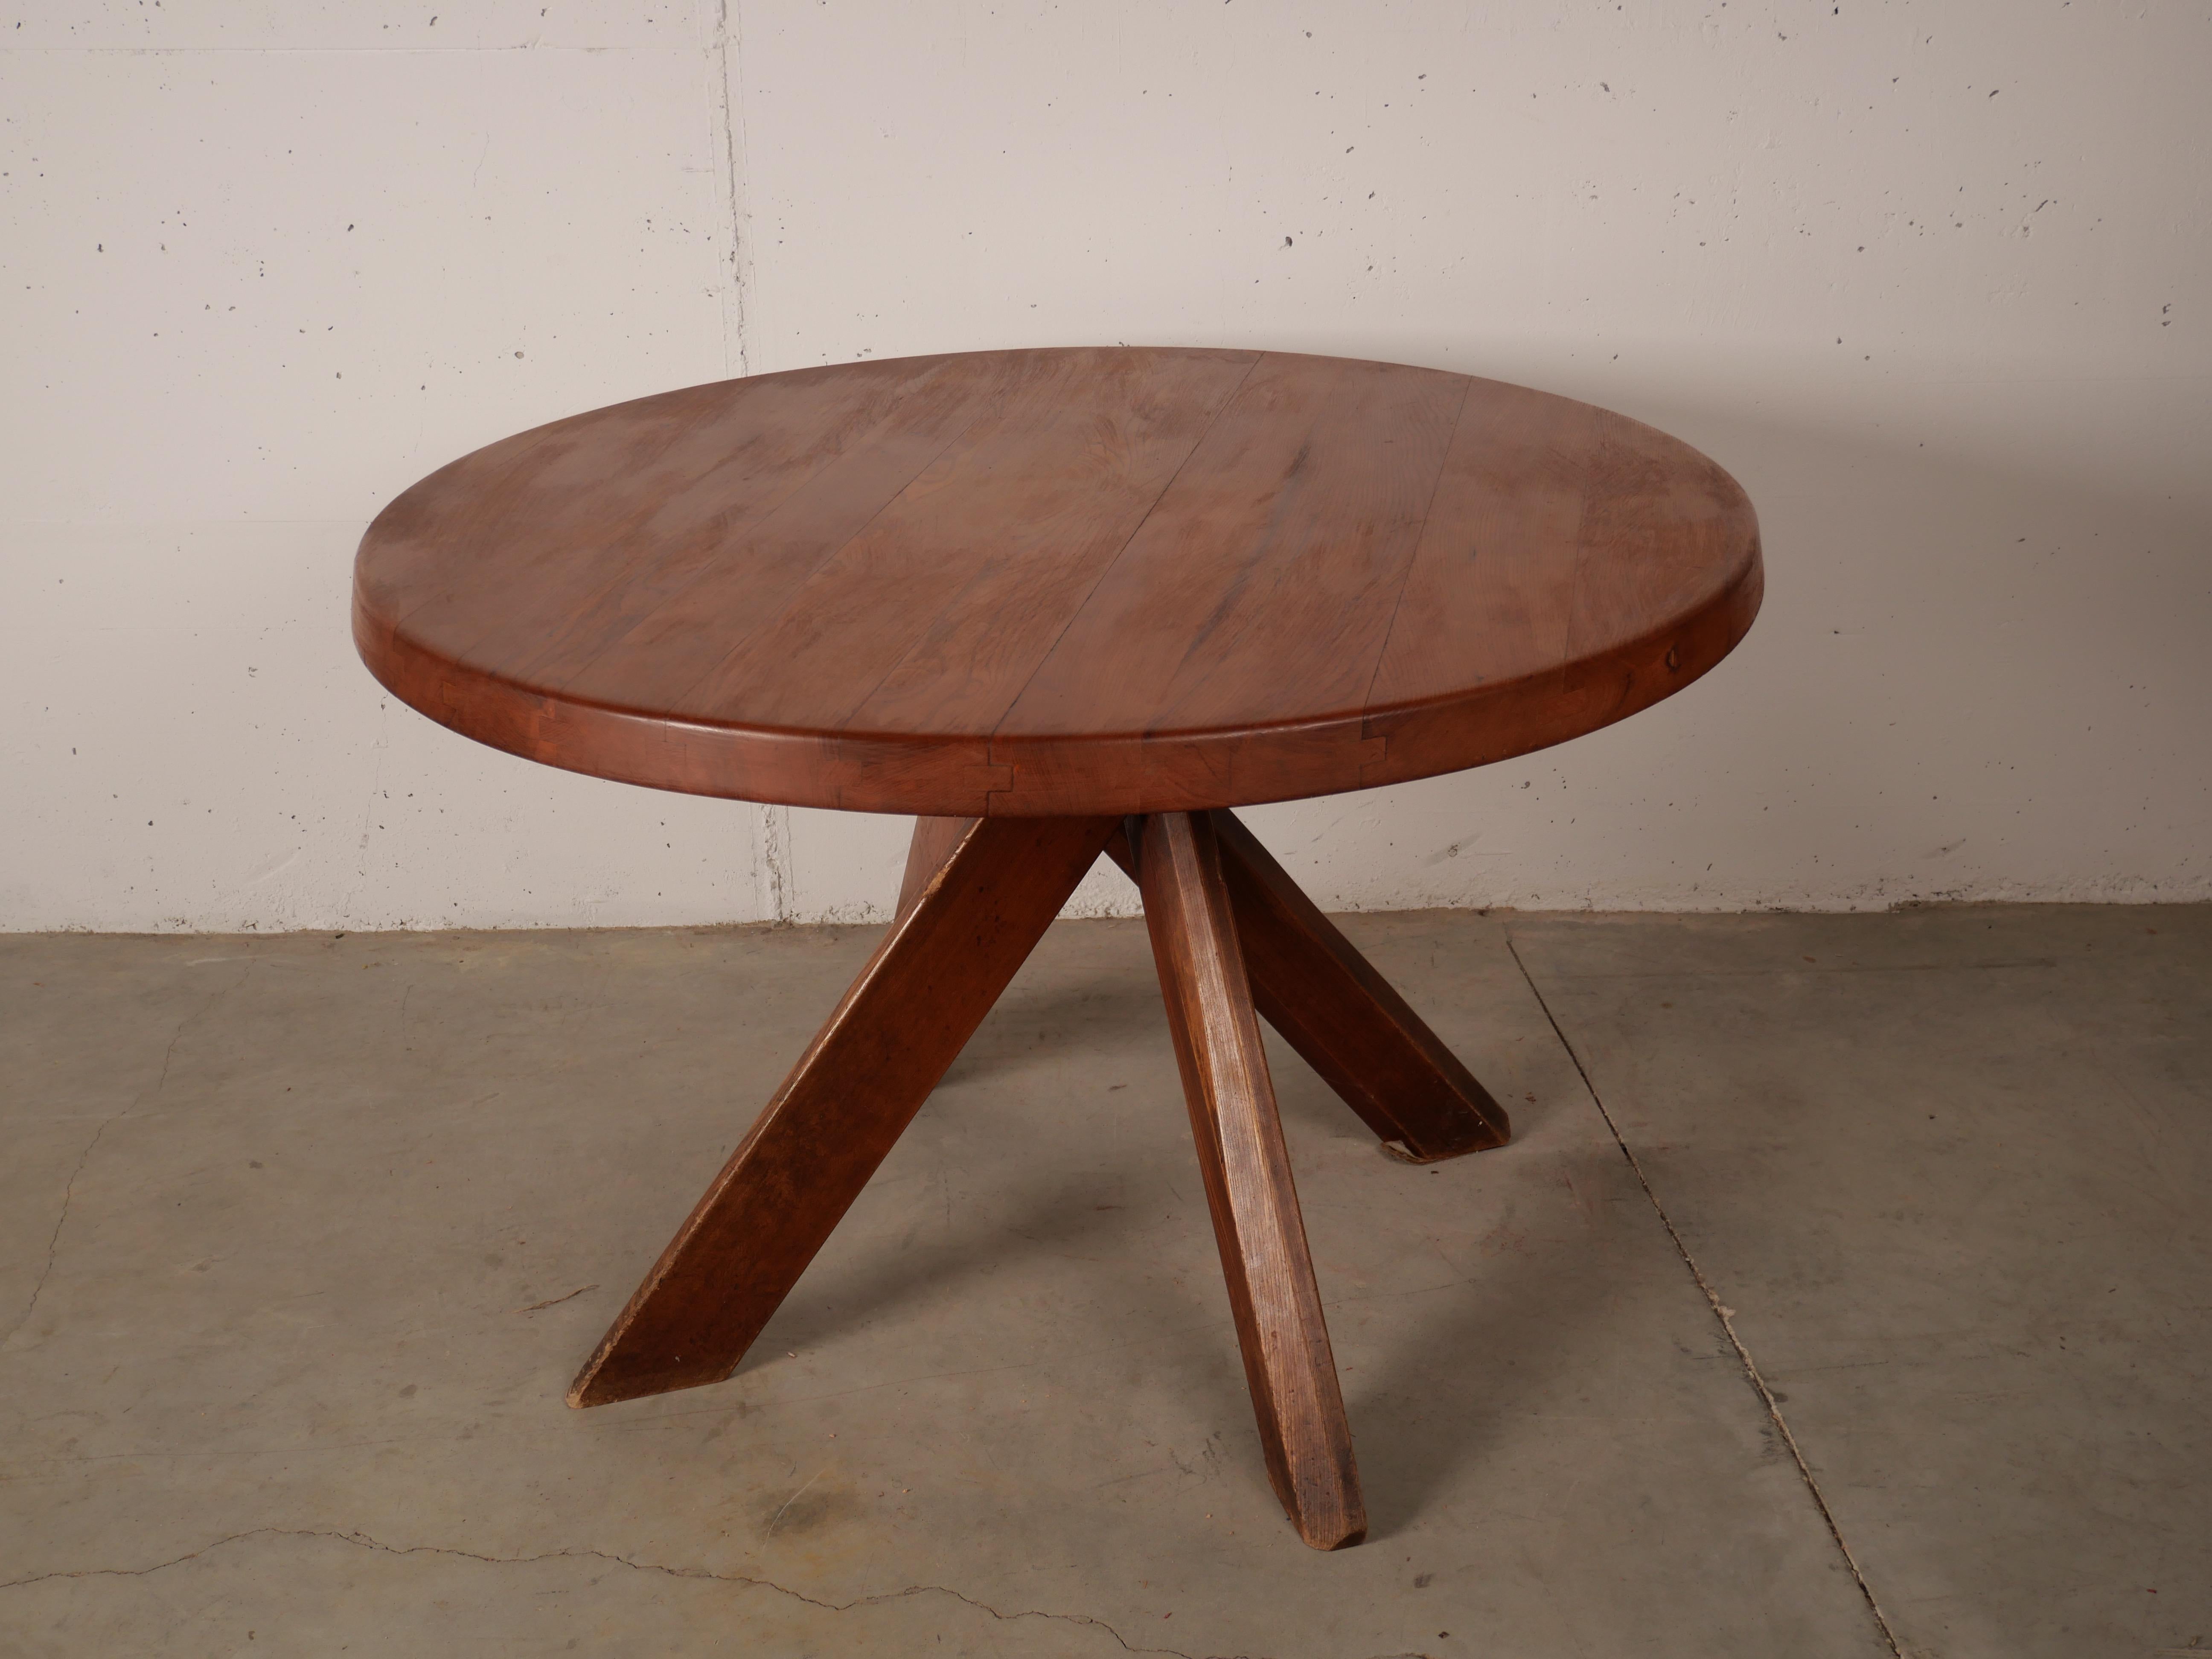 This table is a special order made by Pierre Chapo for a client, the diameter of the top is 110 cm with 4 feets, in a beautiful patinated condition. The shape of the base creates a very open look and makes this an object to make a space more